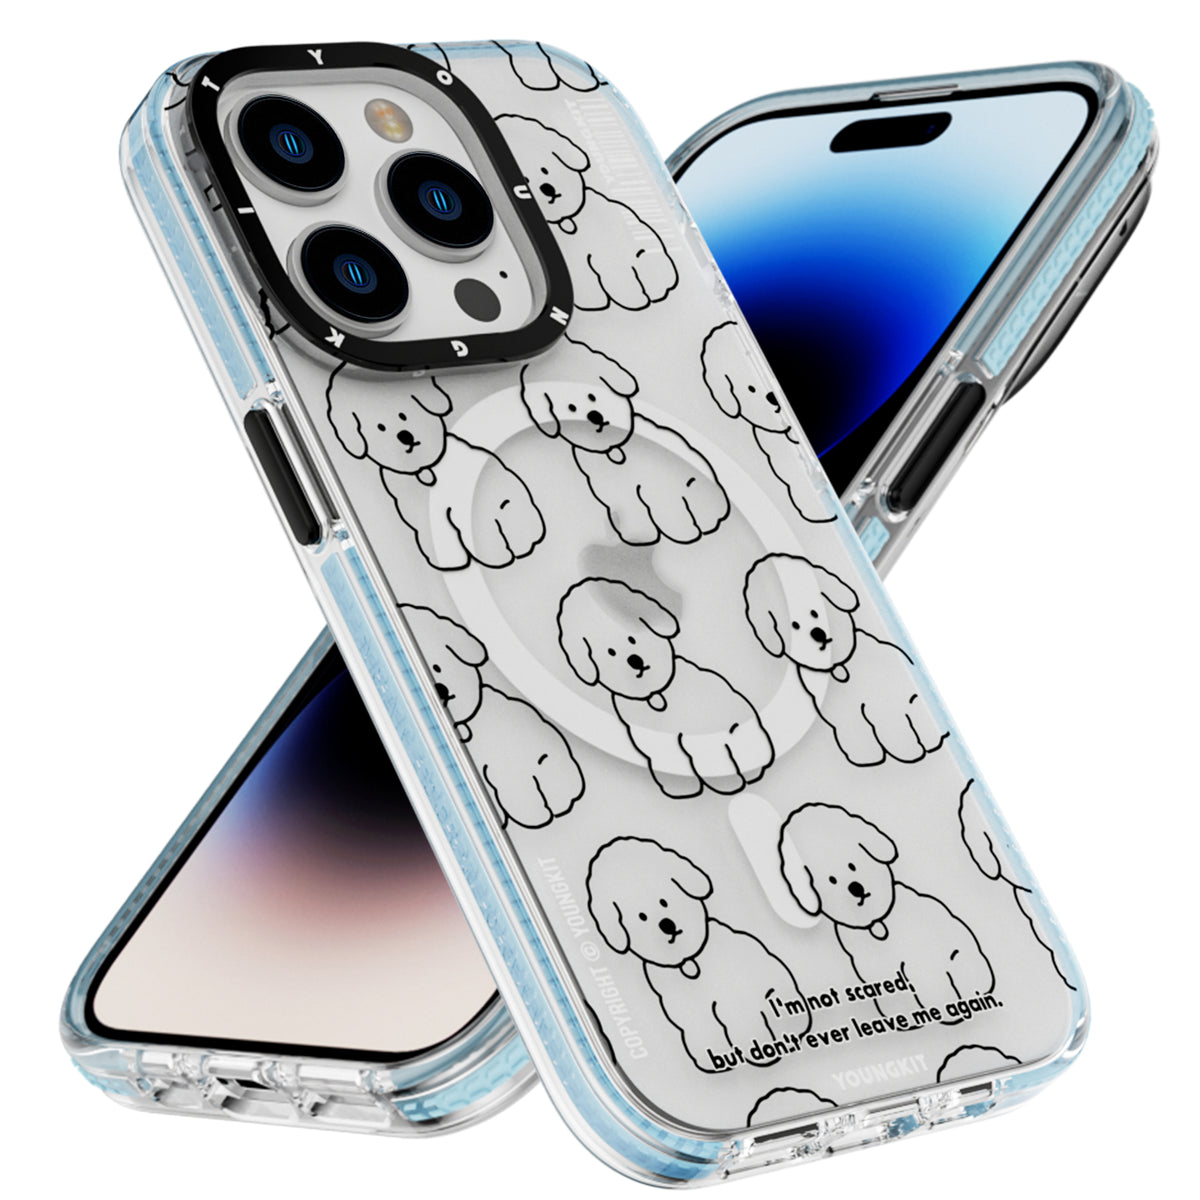 𝙉𝙀𝙒 Youngkit X Artist iej.studio Frosted iPhone13/14 Case-Puppy